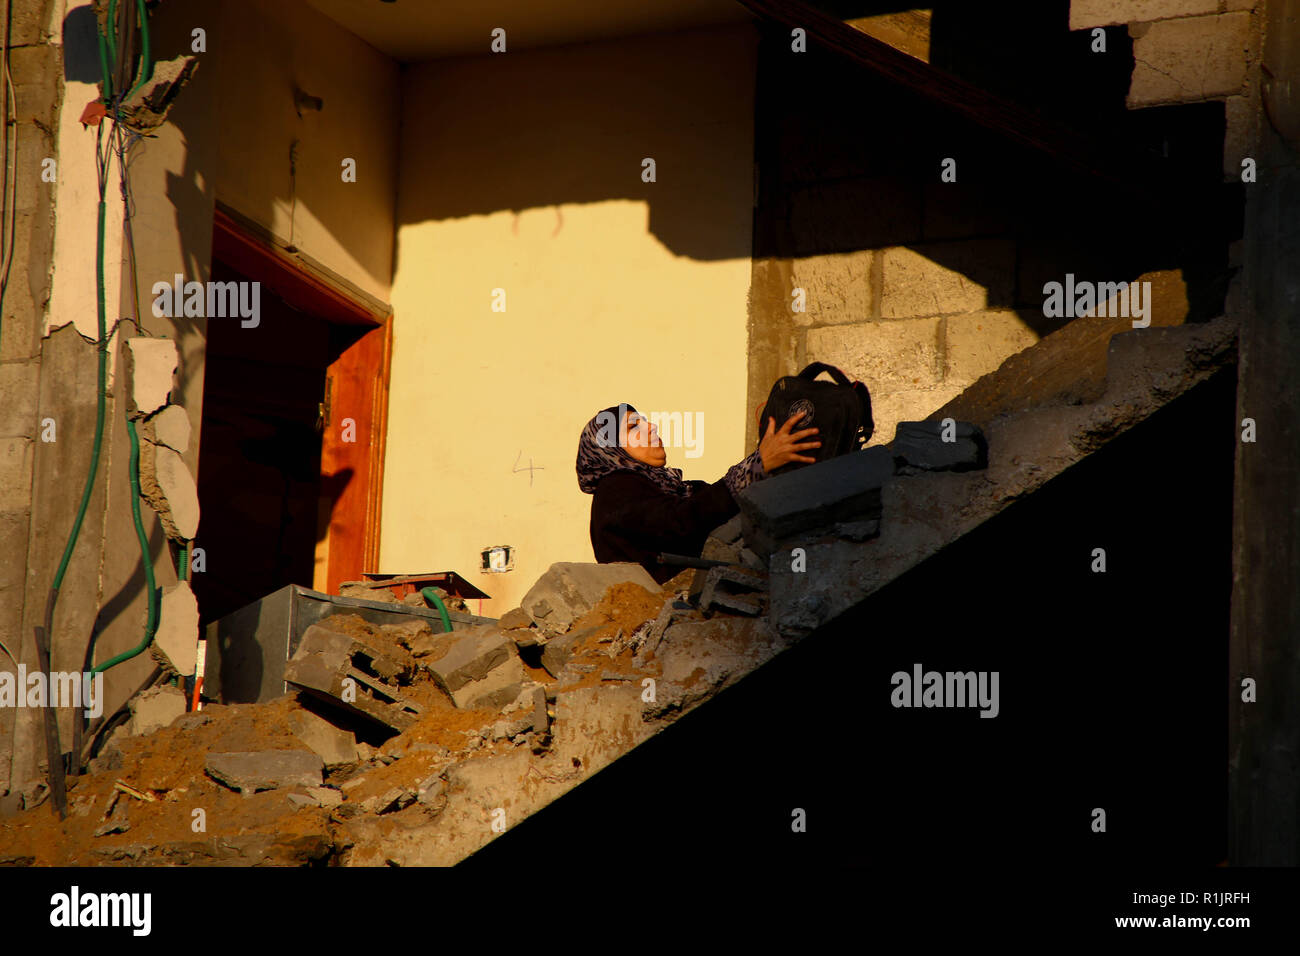 Gaza, Palestine. 13th Nov, 2018. A woman standing next to the rubble site of a building which was bombed by the Zionist occupation planes during the raids in the Gaza Strip. Credit: Ahmad Hasaballah/SOPA Images/ZUMA Wire/Alamy Live News Stock Photo